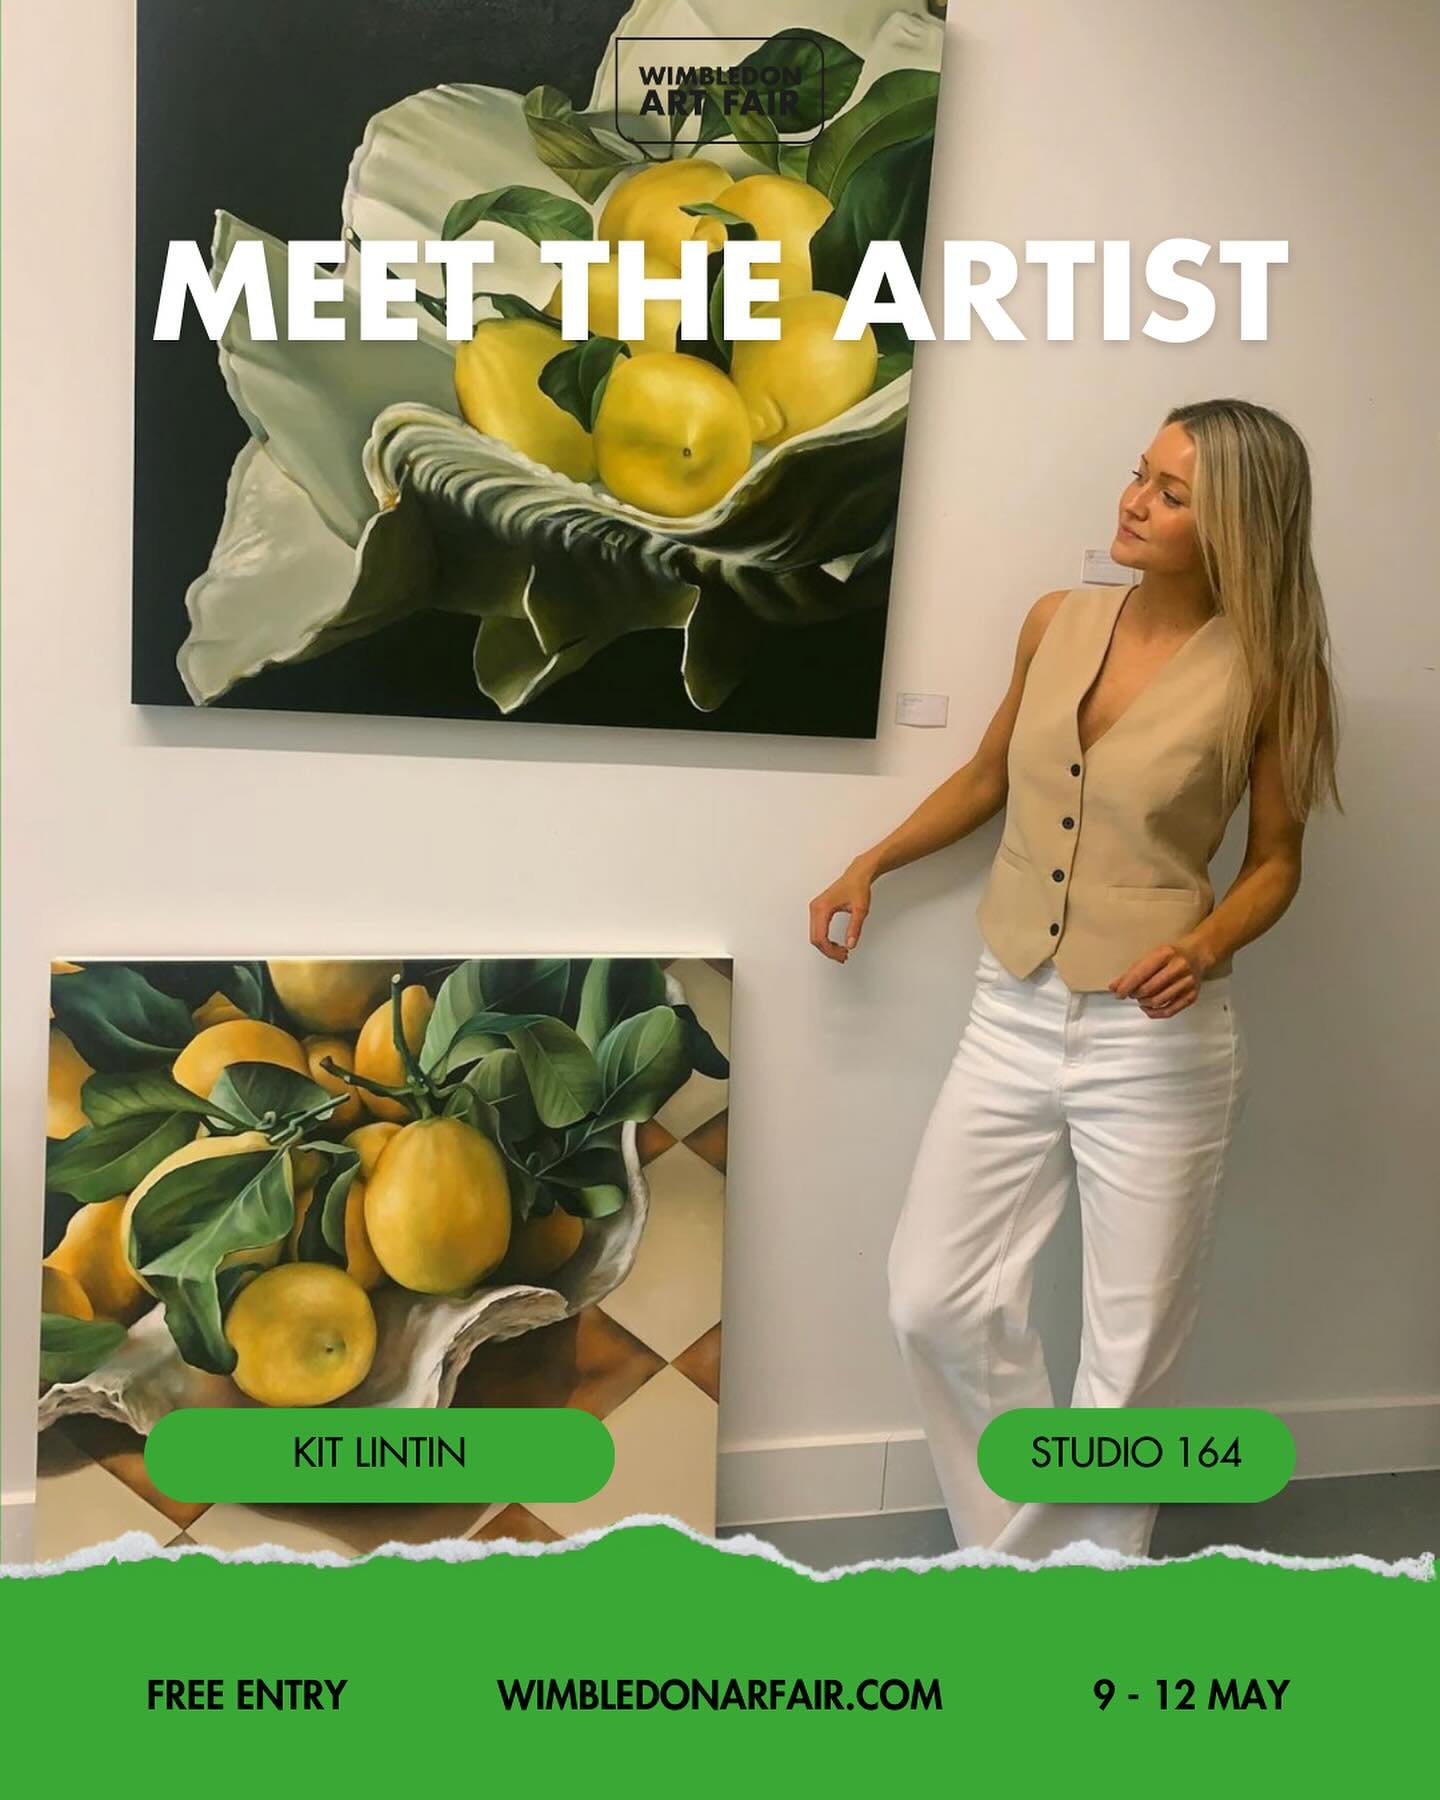 Meet Kit Lintin | Studio 164 🟢

Step into the surreal world of @kitlintin, where everyday objects dance with symbolism on the canvas. ✨

Kit Lintin, a contemporary oil painter in London, blends everyday elements with surreal storytelling, crafting s